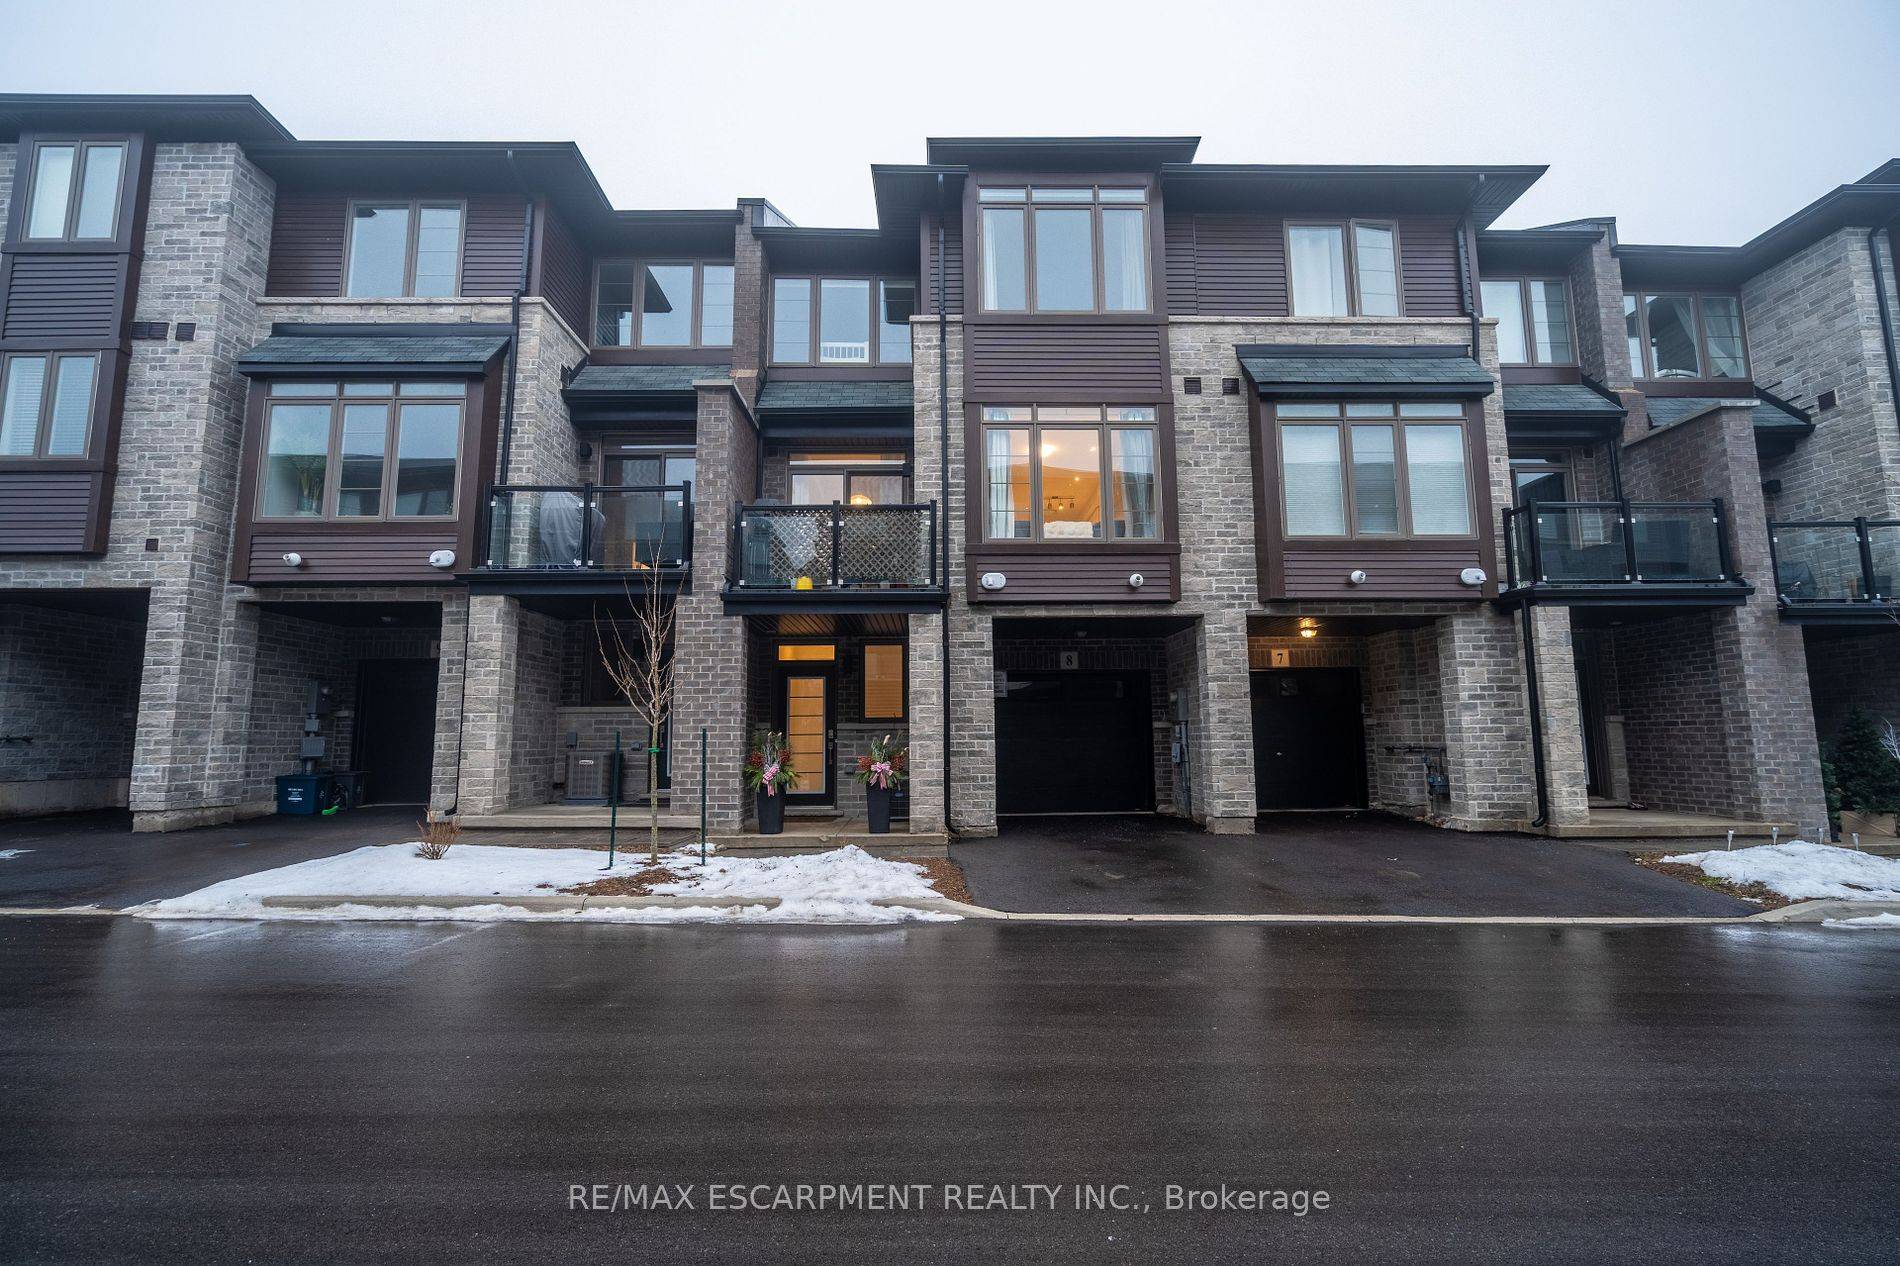 Beautifully built by Losani homes, this is the perfect property for first time buyers or for young families looking to upsize from condo living.